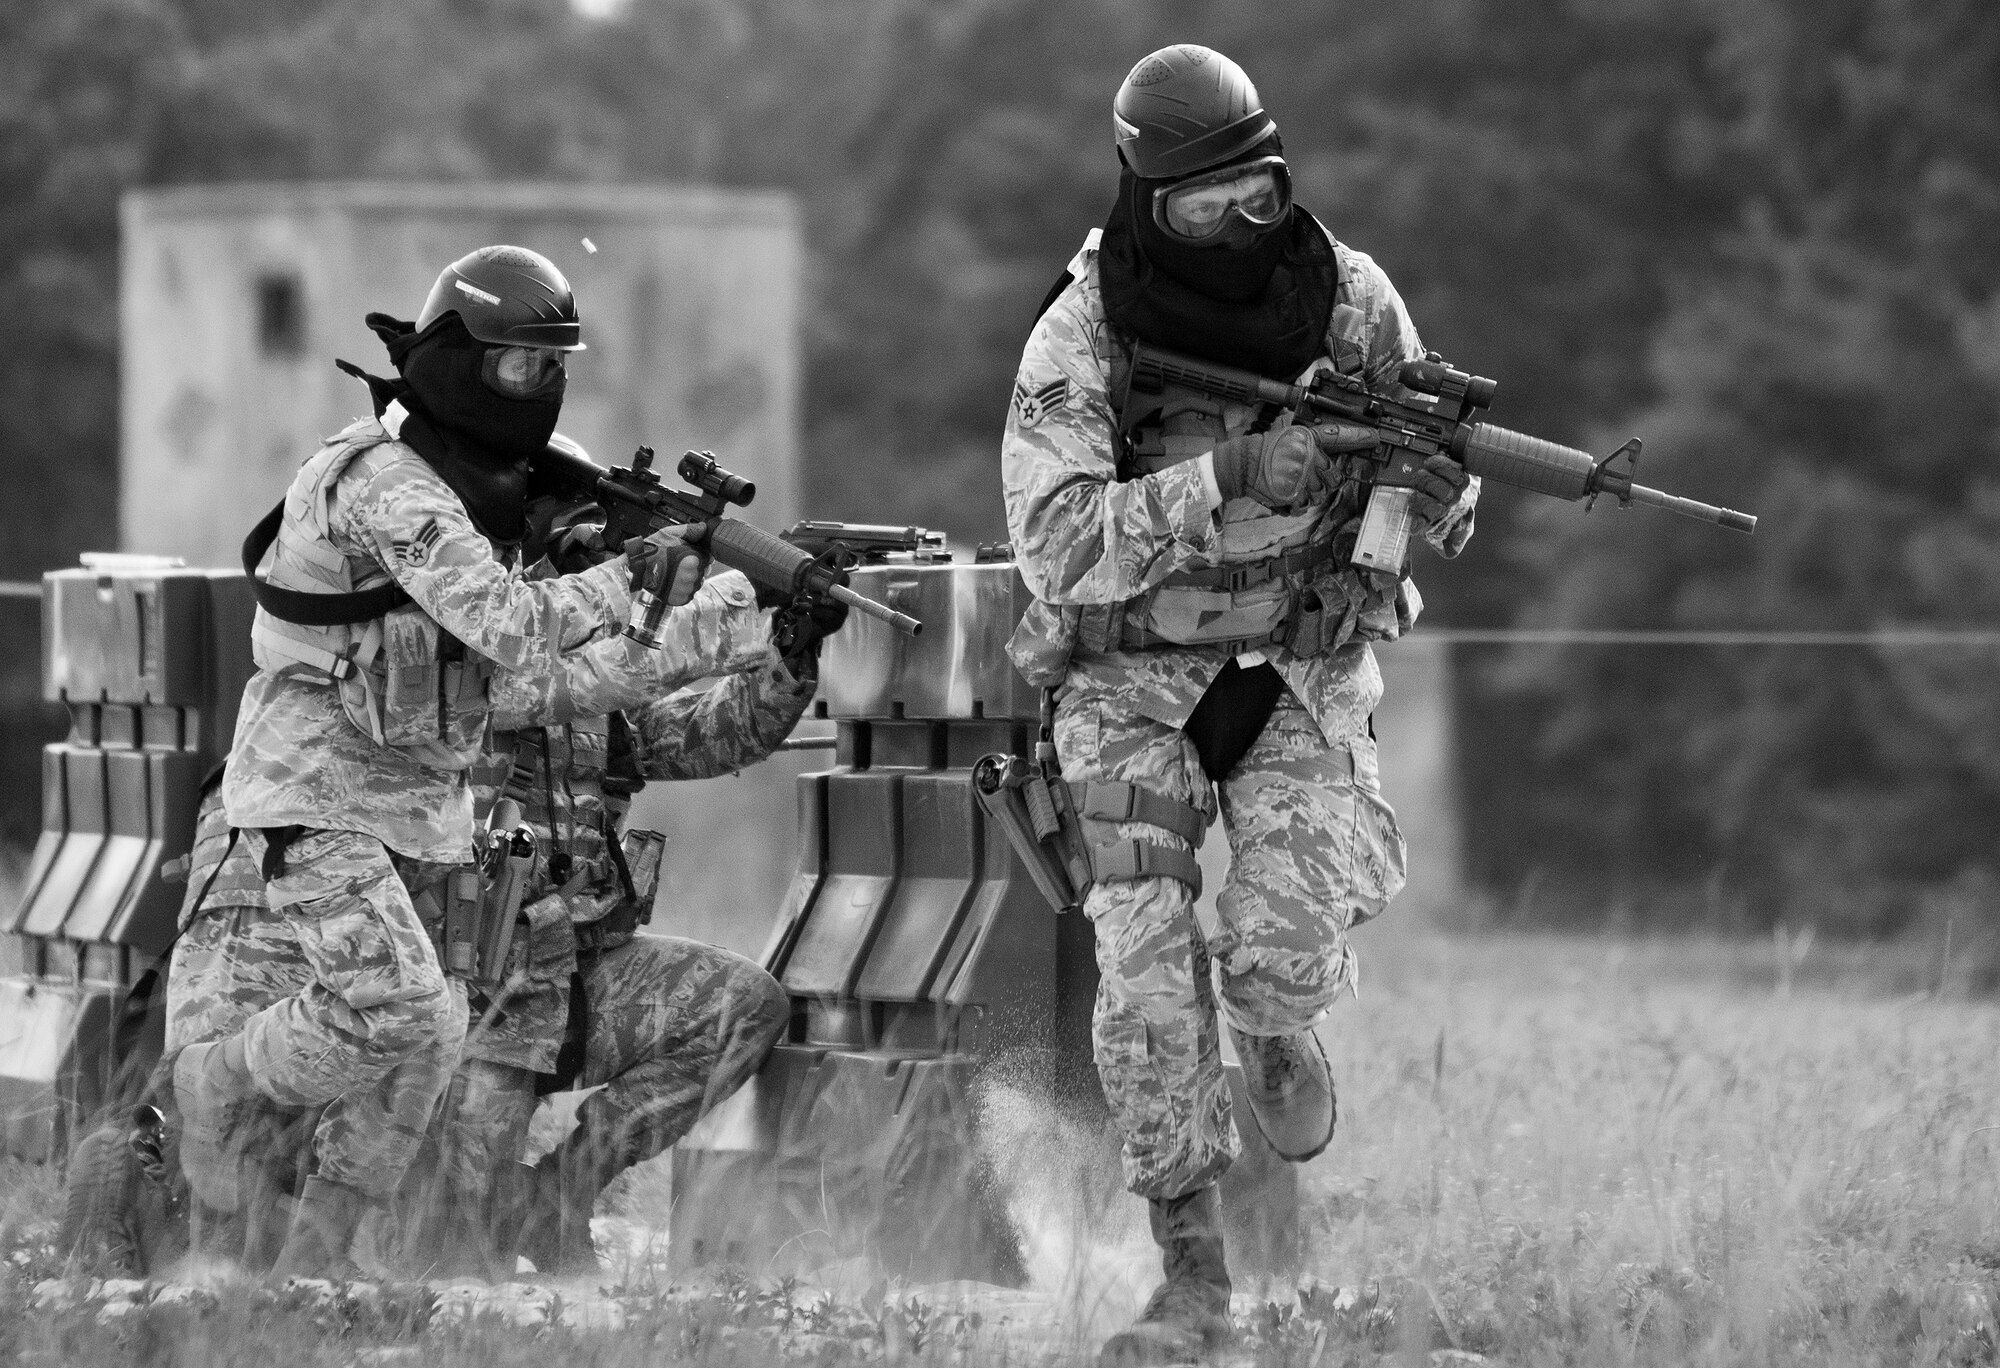 A team of 96th Security Forces Squadron Airmen perform a side-advancing movement during a shoot, move and communicate drill in June at Eglin Air Force Base, Fla.  The mandatory training requirement is in addition to annual weapons qualification training.  The exercise consists of Airmen firing simmunition ammo while advancing toward, away from and to the side of a target.  This is followed by a building sweep and clear drill. Eglin’s security forces personnel protect and defend the main base, facilities, gates, Duke Field, 7th SFG compound and land and water ranges.  (U.S. Air Force photo/Tech. Sgt. Sam King)